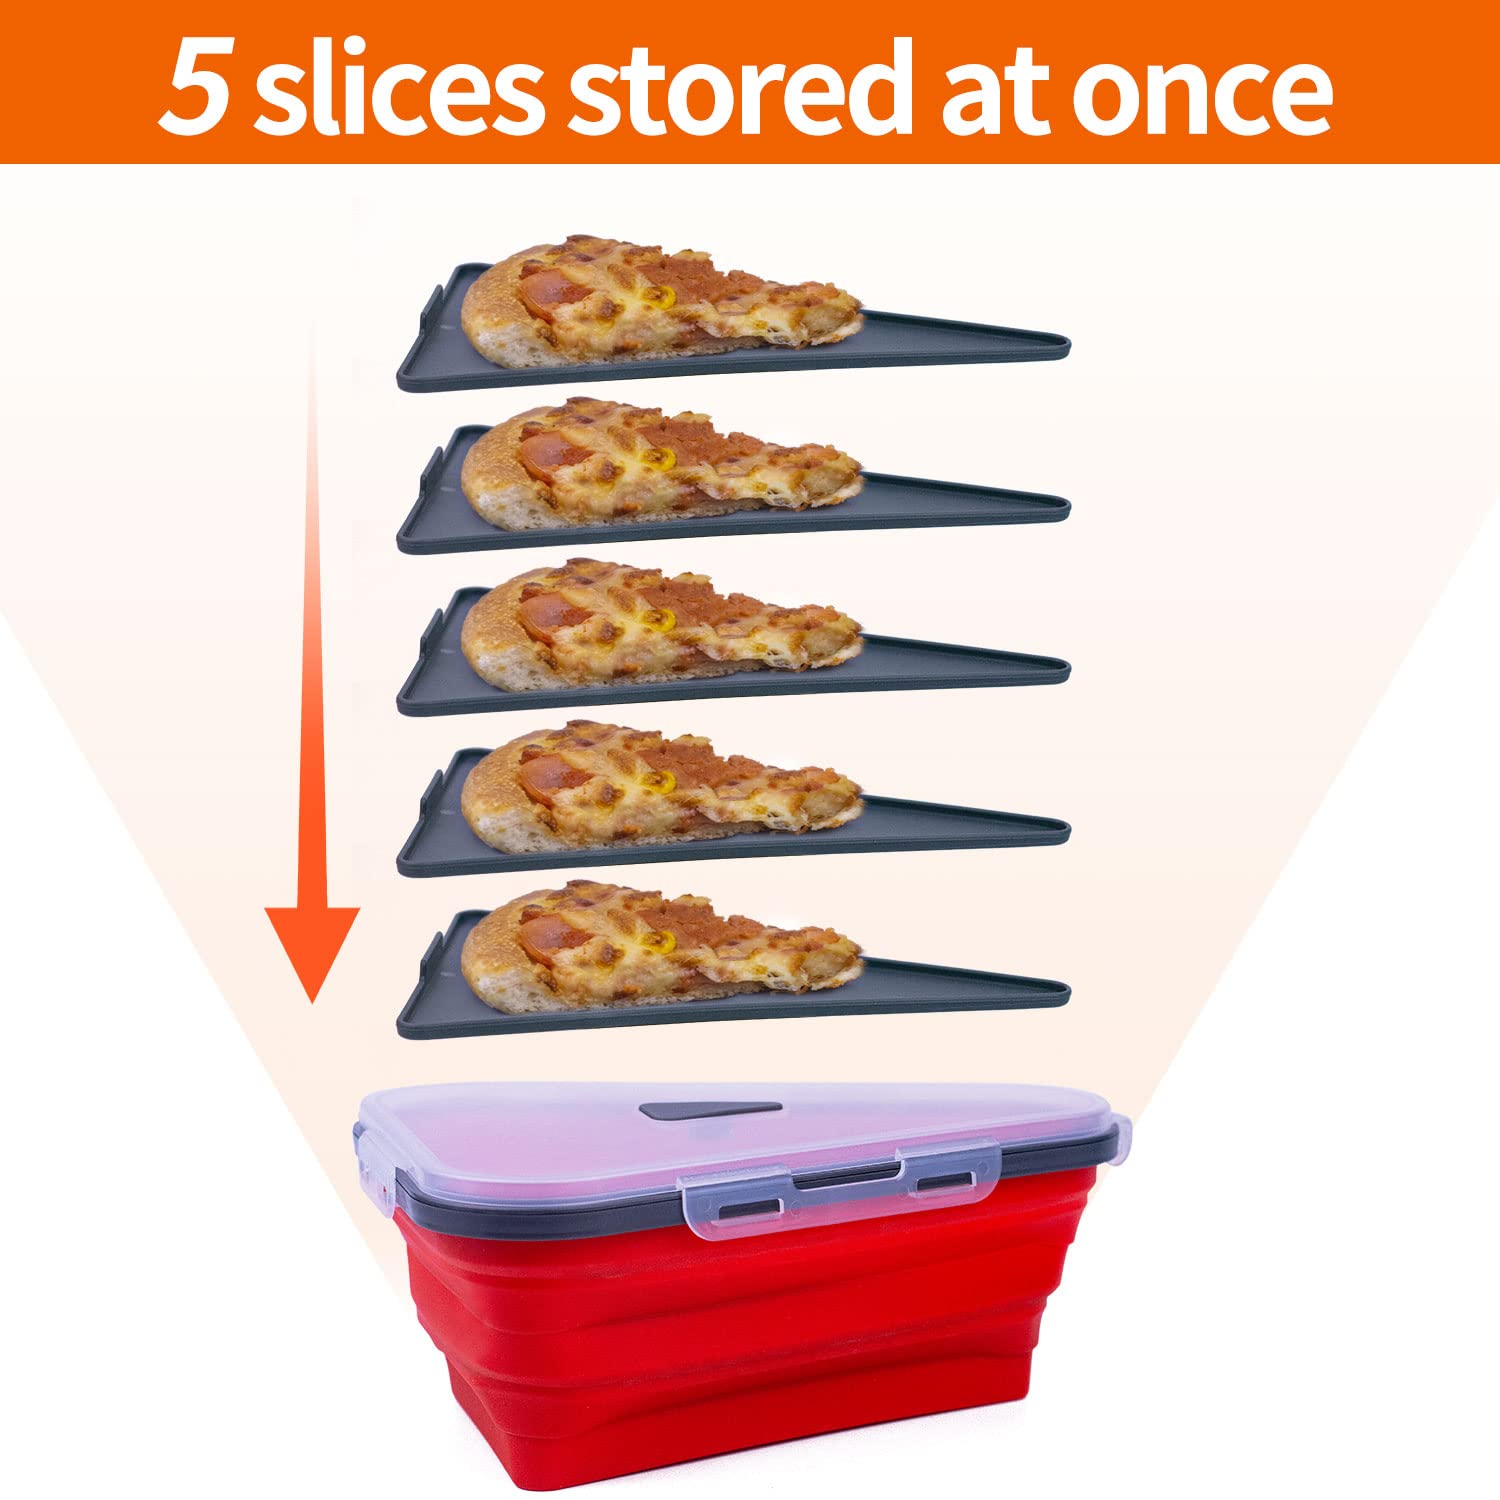 CITOR Pizza Storage Container, Reusable Expandable Silicone Pizza Slice Keeper to Organize and Save Space with 5 Plates Safe for Microwave